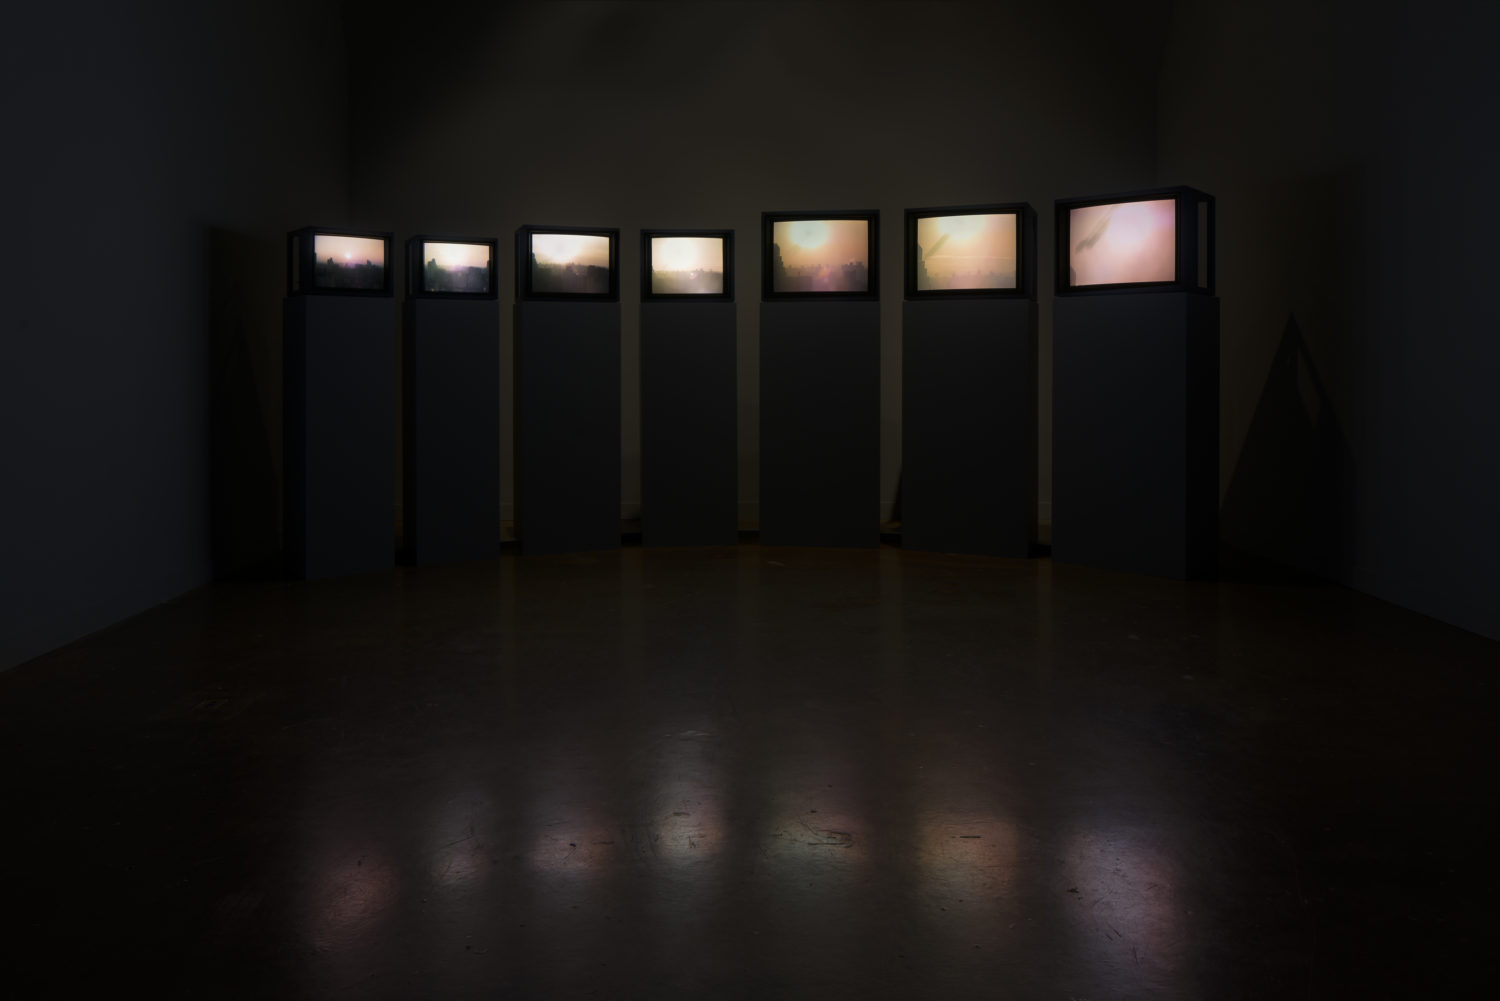 Mary Lucier, Equinox, 1979/2016<br /> Seven-channel video installation with sound, 33:00 min. 17 ft, 8 × 68 × 94 ¼ in. (539 × 173 × 239 cm)<br /> Courtesy the artist and Lennon, Weinberg, Inc., New York - Photo: Peter Harris Studio<br /> Exhibition installation view of Before Projection: Video Sculpture 1974–1995 at MIT<br />